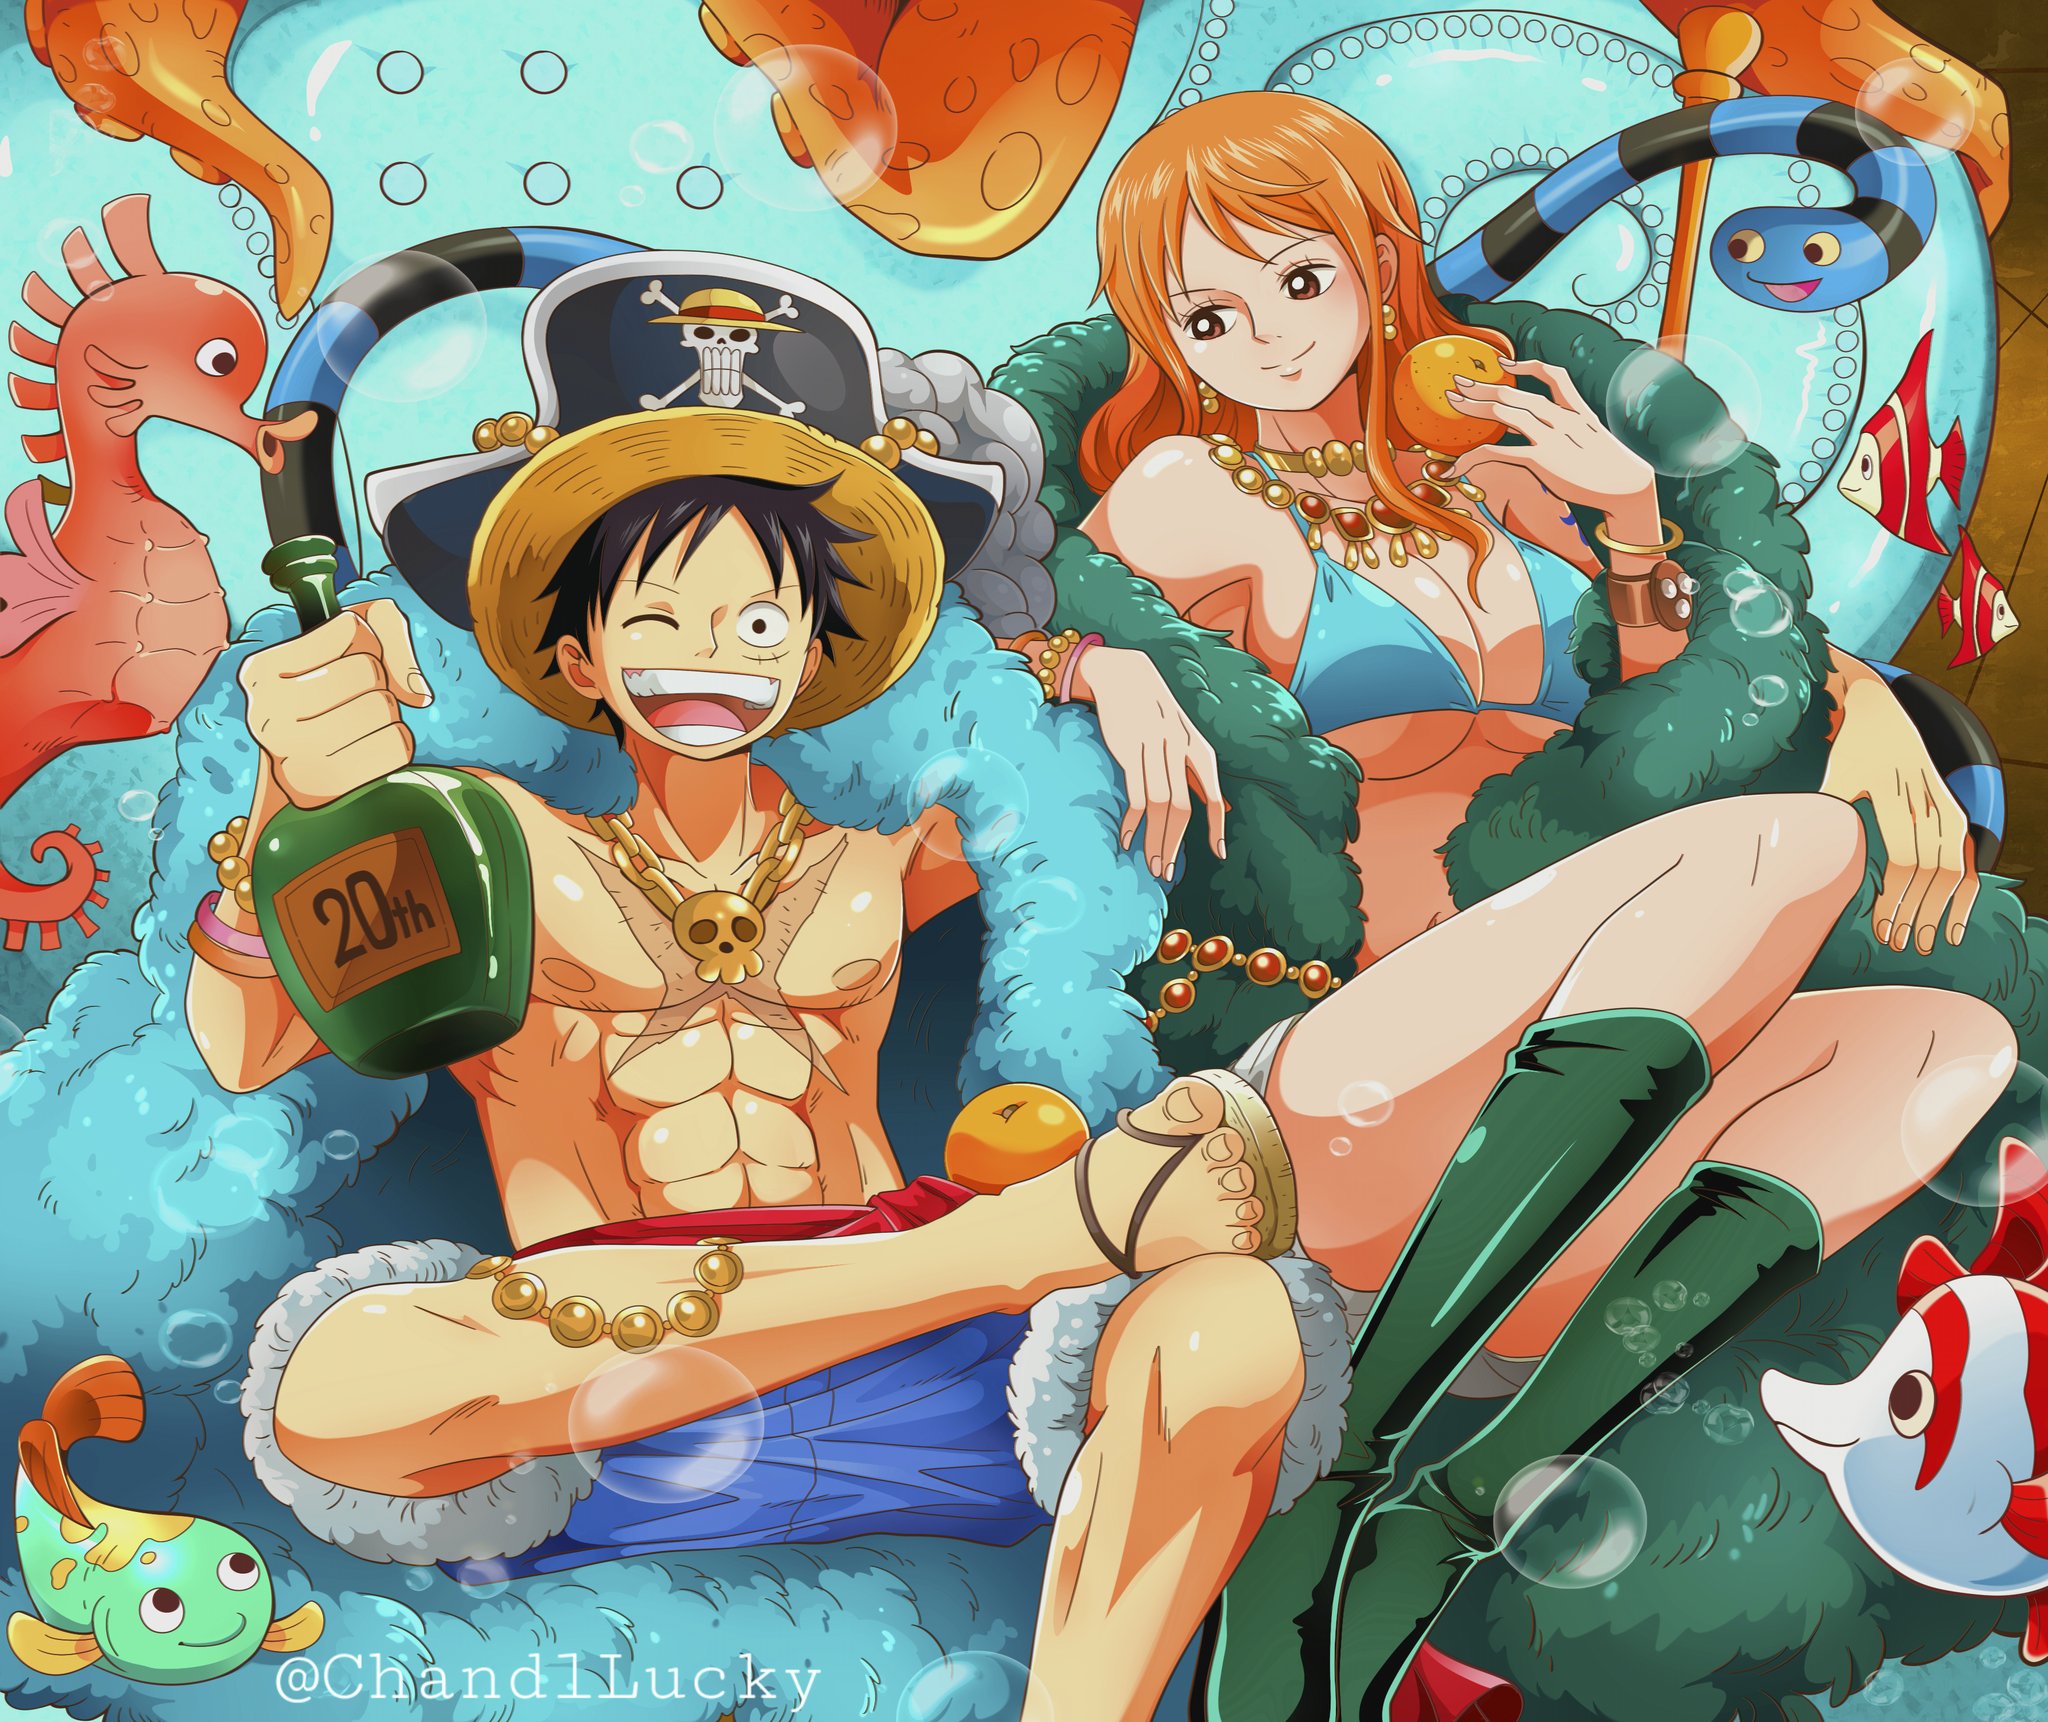 X 上的daily lunami 👒🍊：「just luffy taking care of nami when she